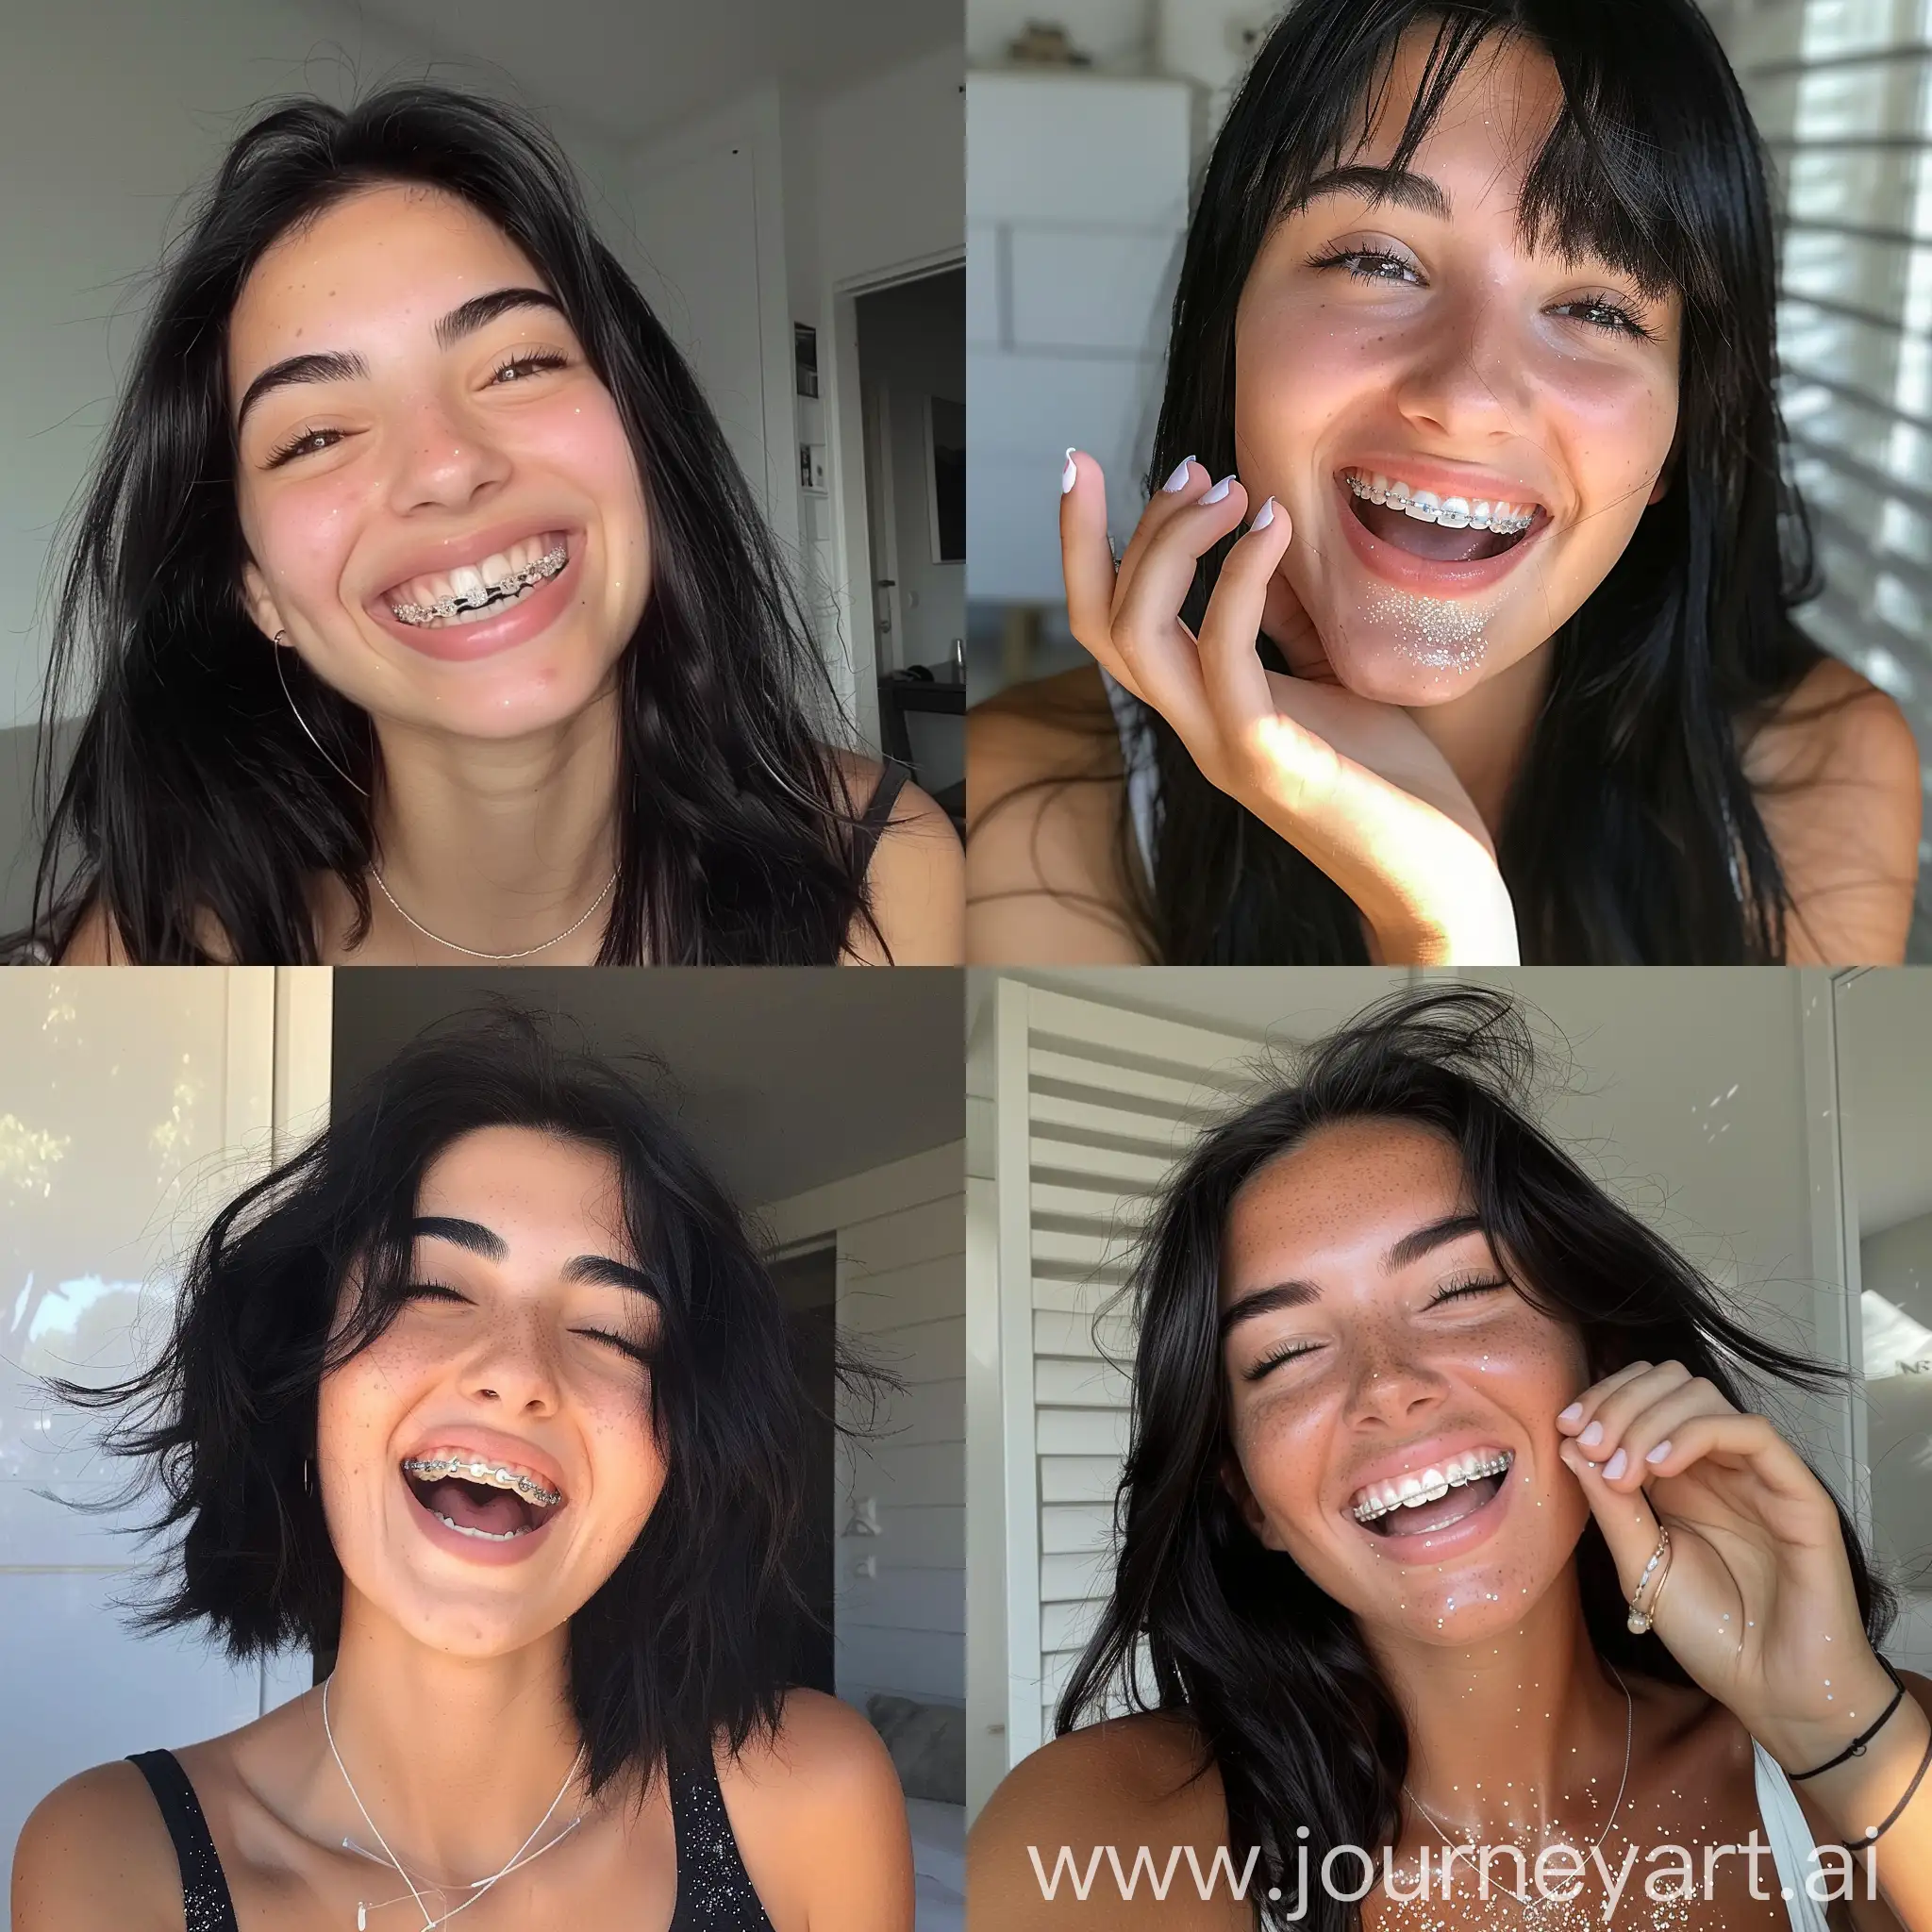 Turkish-Girl-with-Black-Hair-and-Retainer-Laughing-in-Summer-Vibes-Selfie